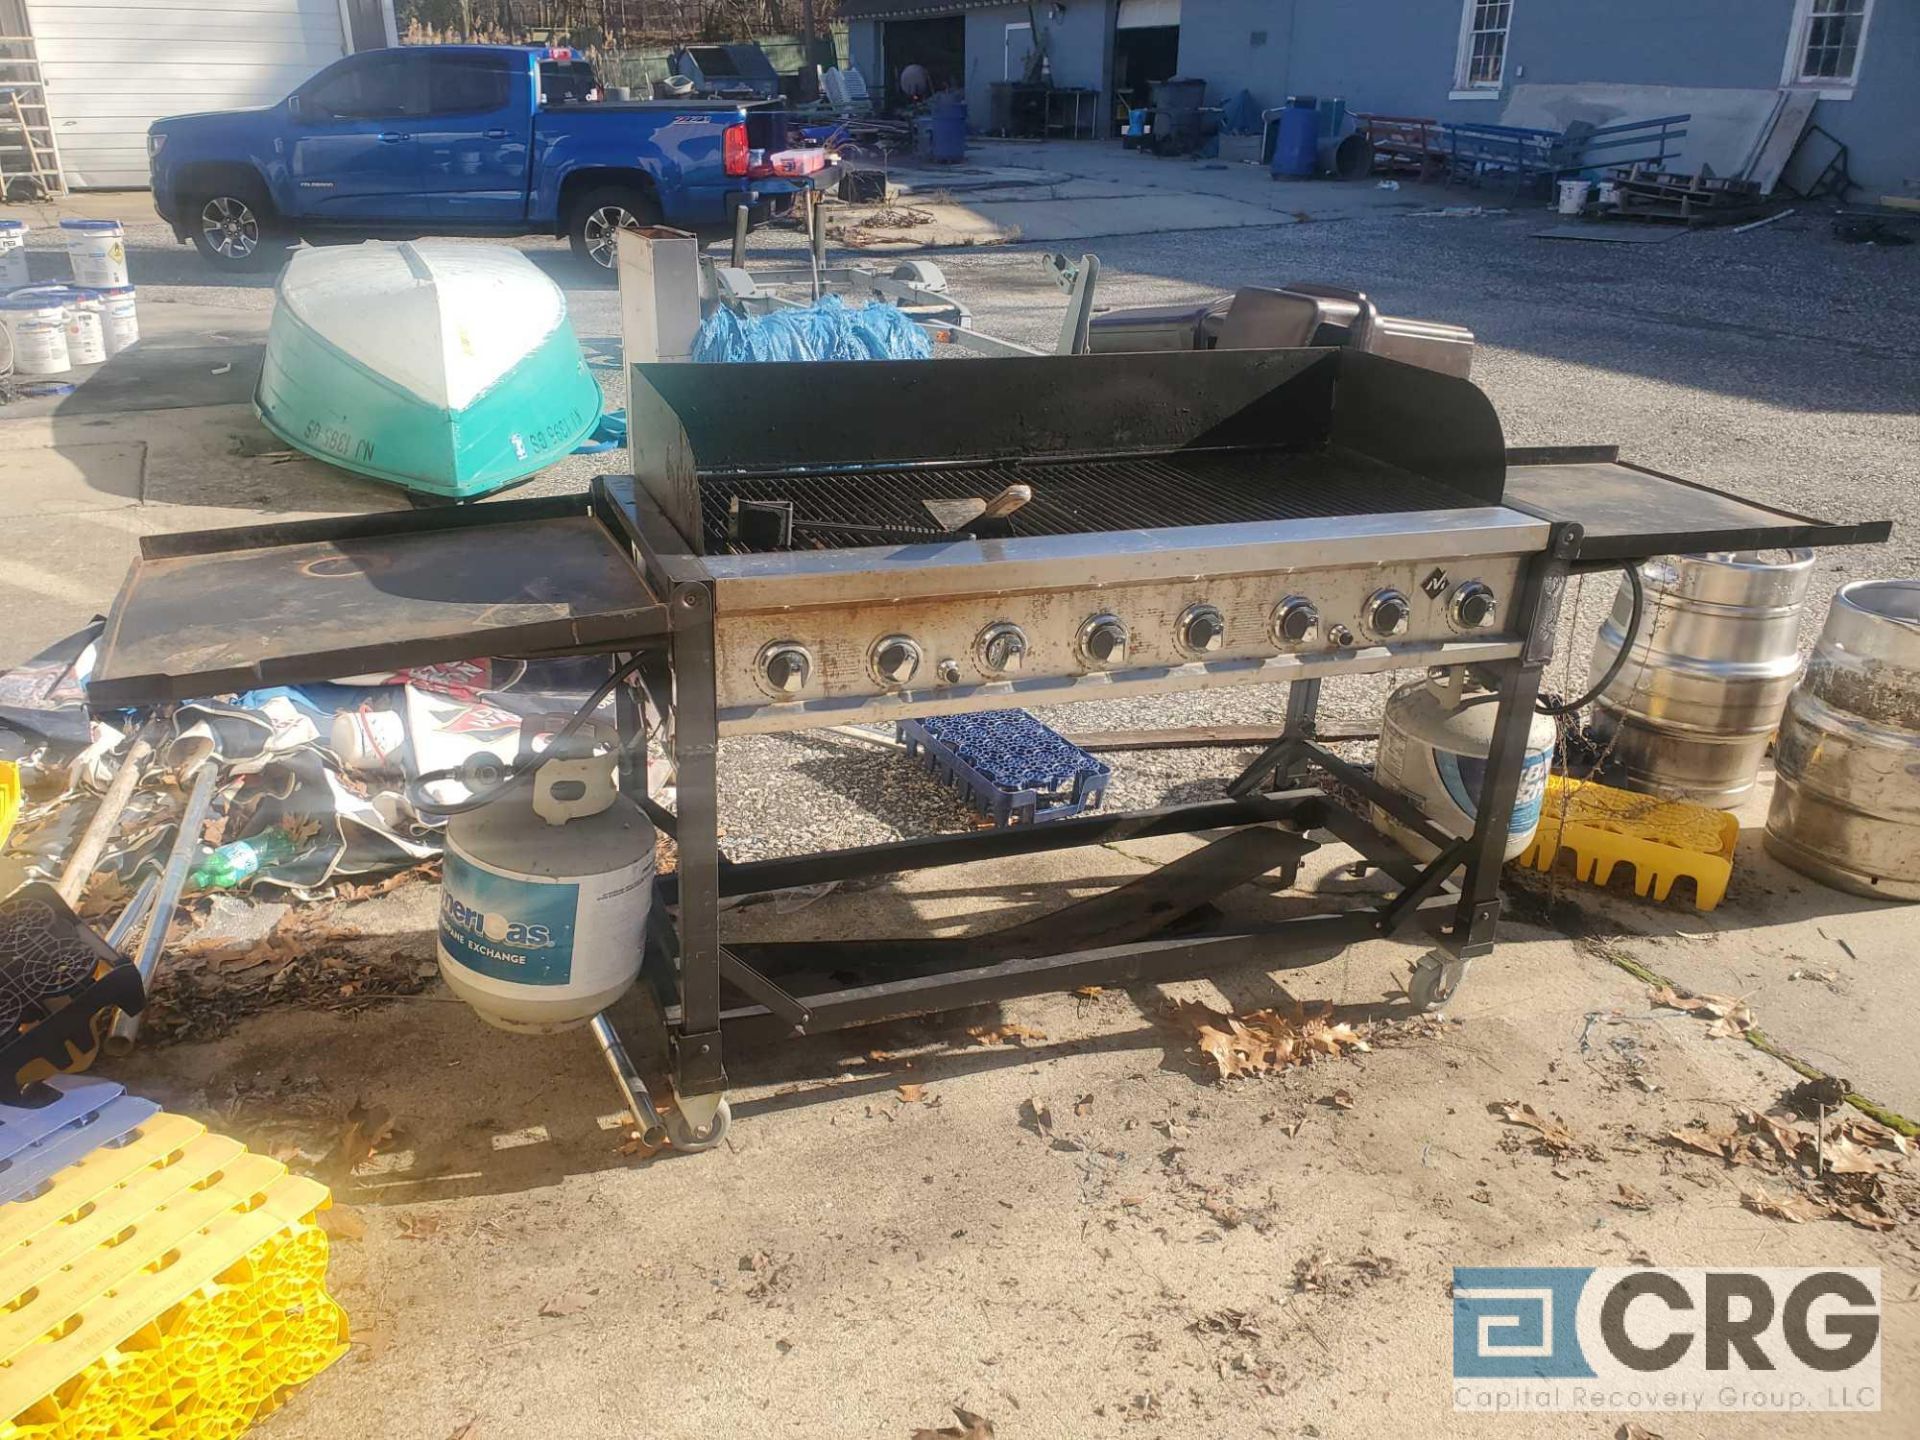 6 foot portable gas grill (located in maintenance area)